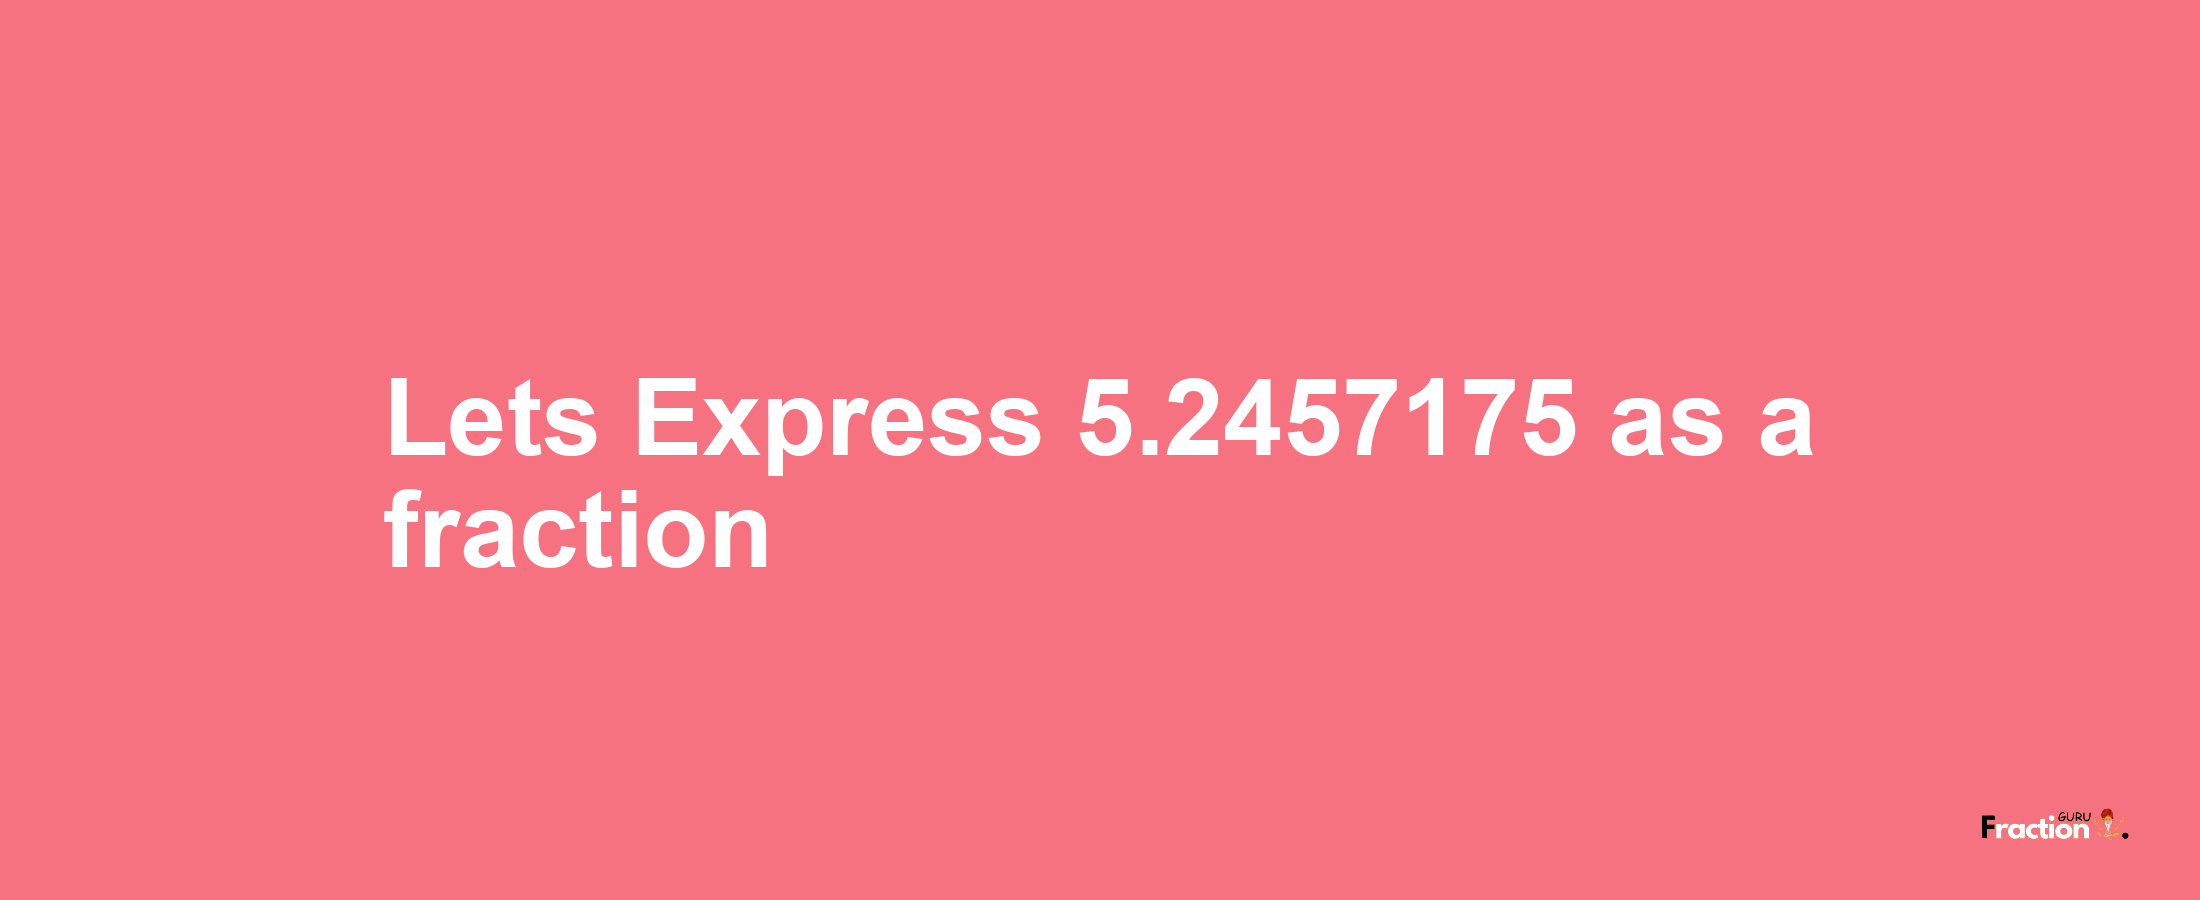 Lets Express 5.2457175 as afraction